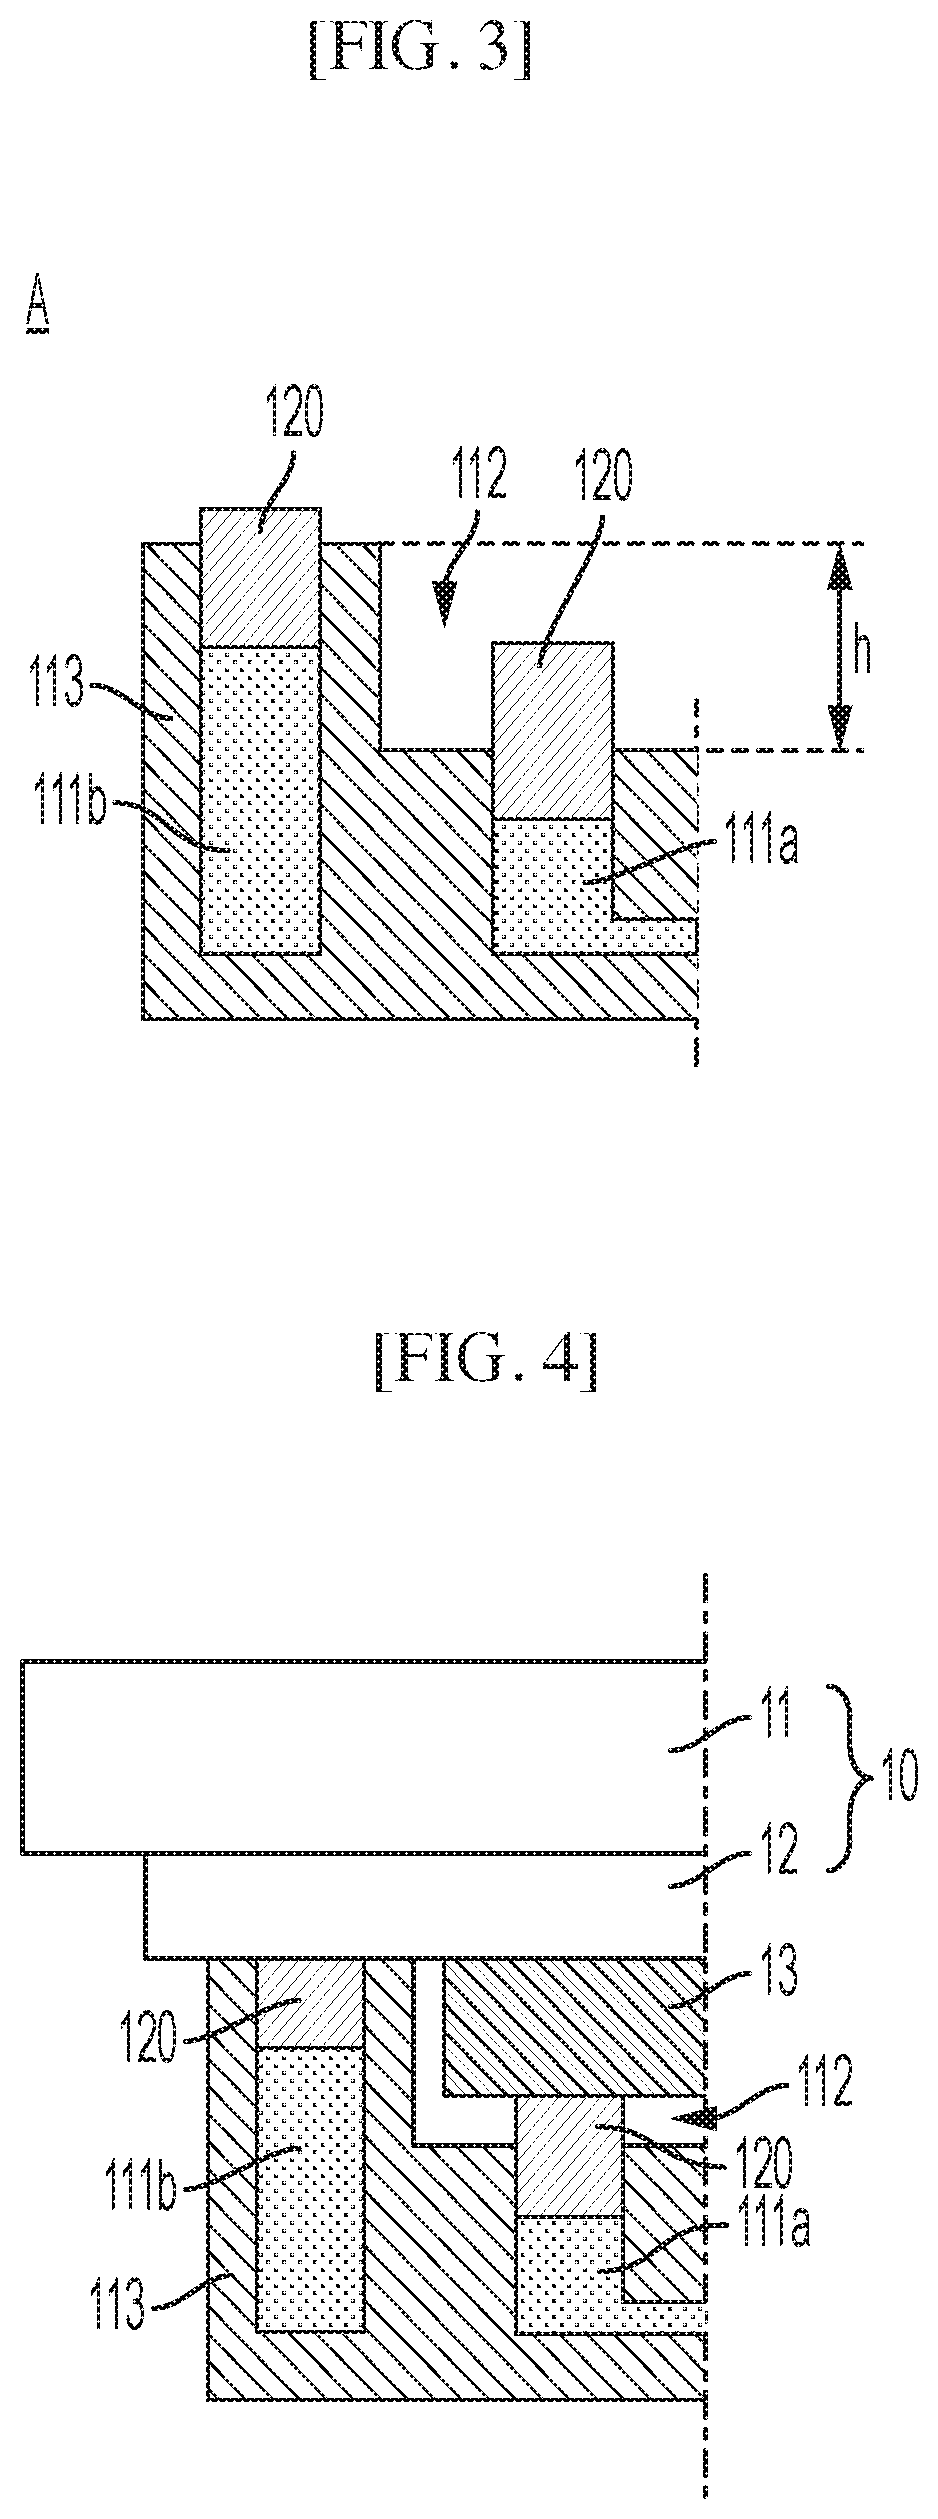 Apparatus for supporting debonding and debonding method using the same